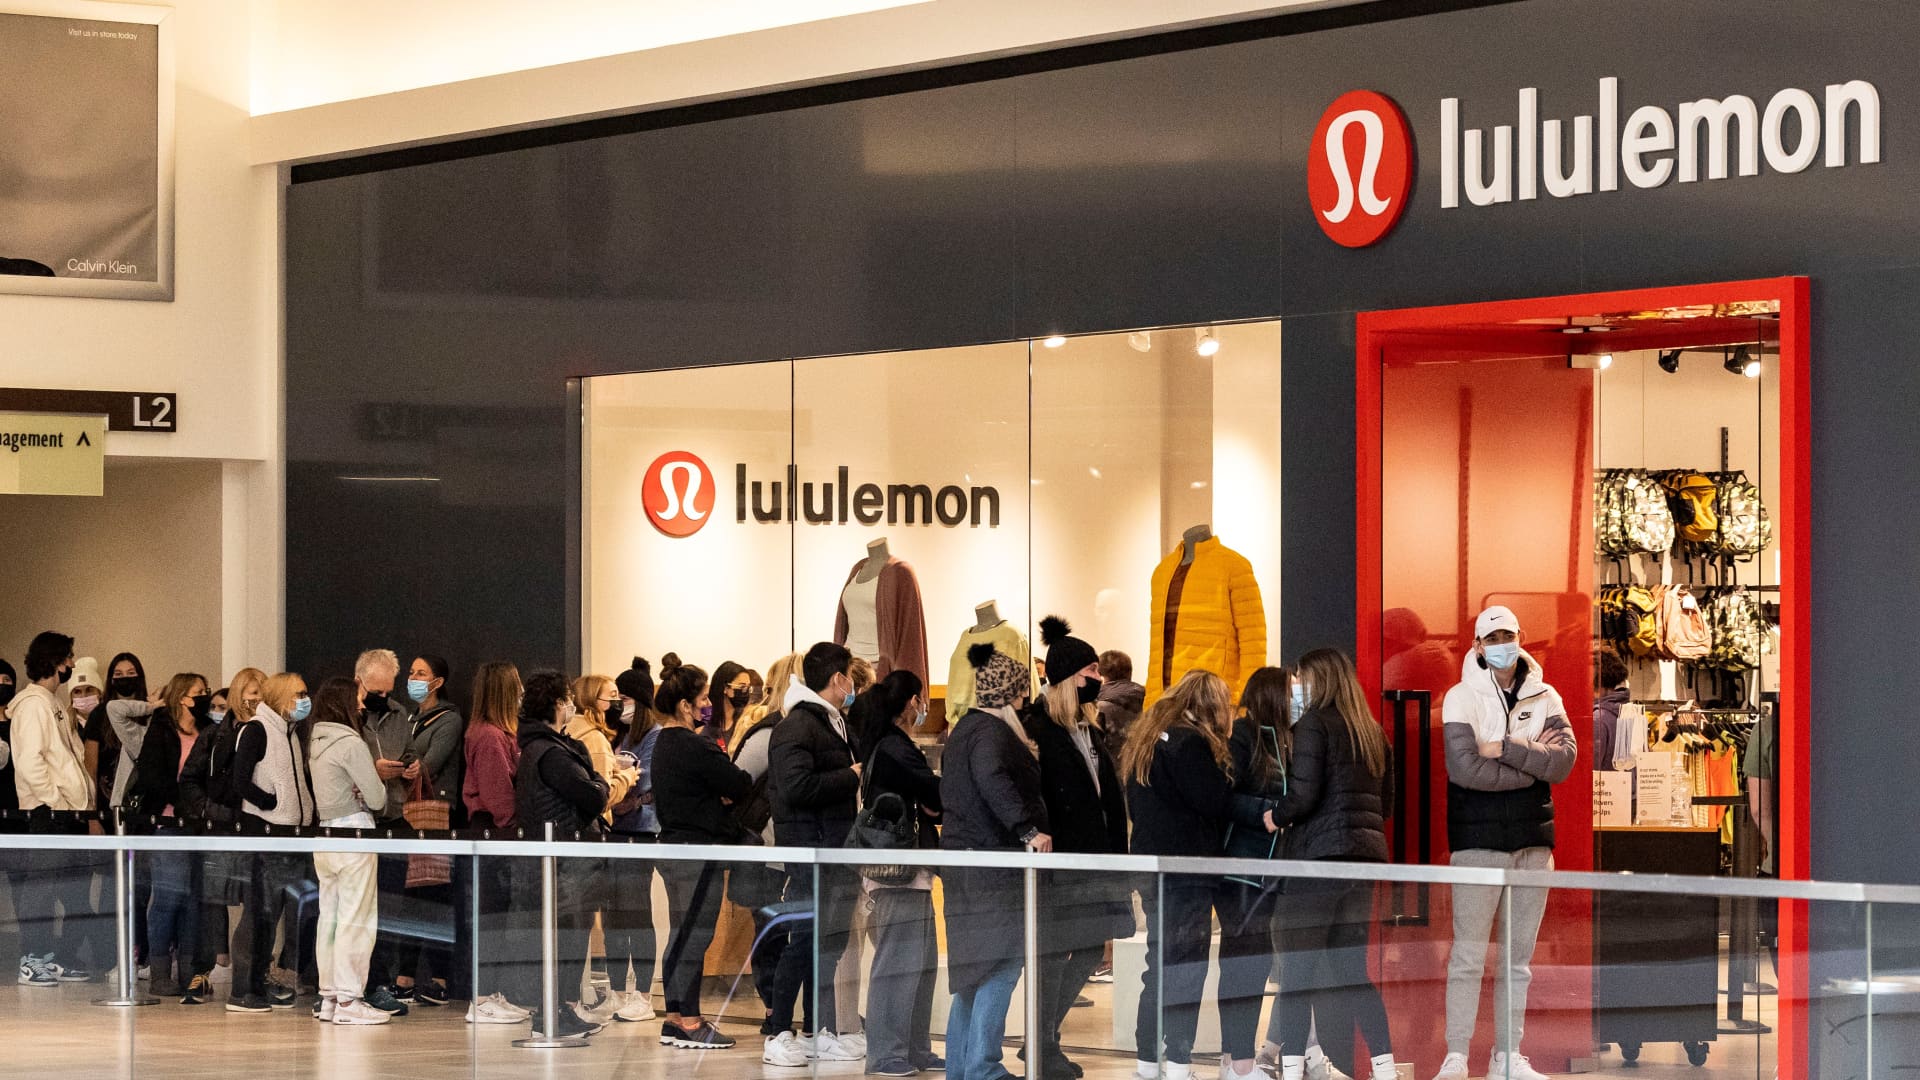 Citi upgrades Lululemon shares to buy, citing strong brand momentum